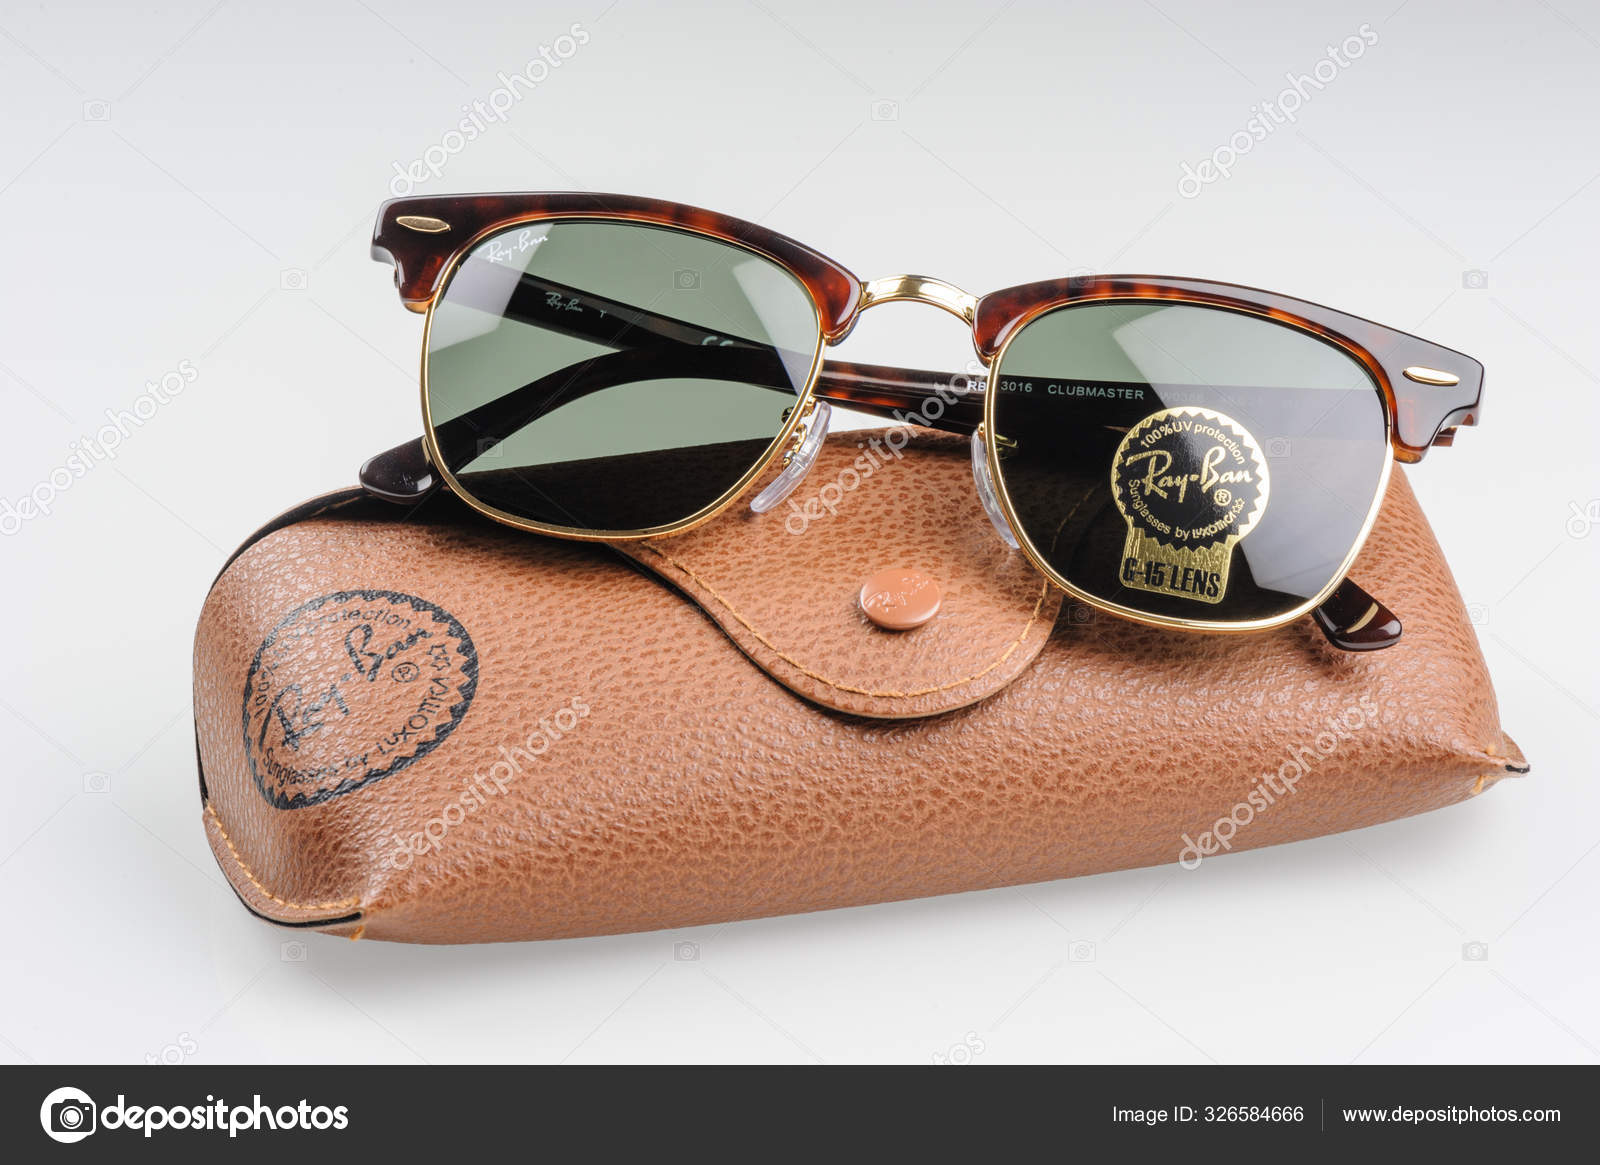 Sunglasses from RayBan – Stock Editorial Photo © norgallery #326584666